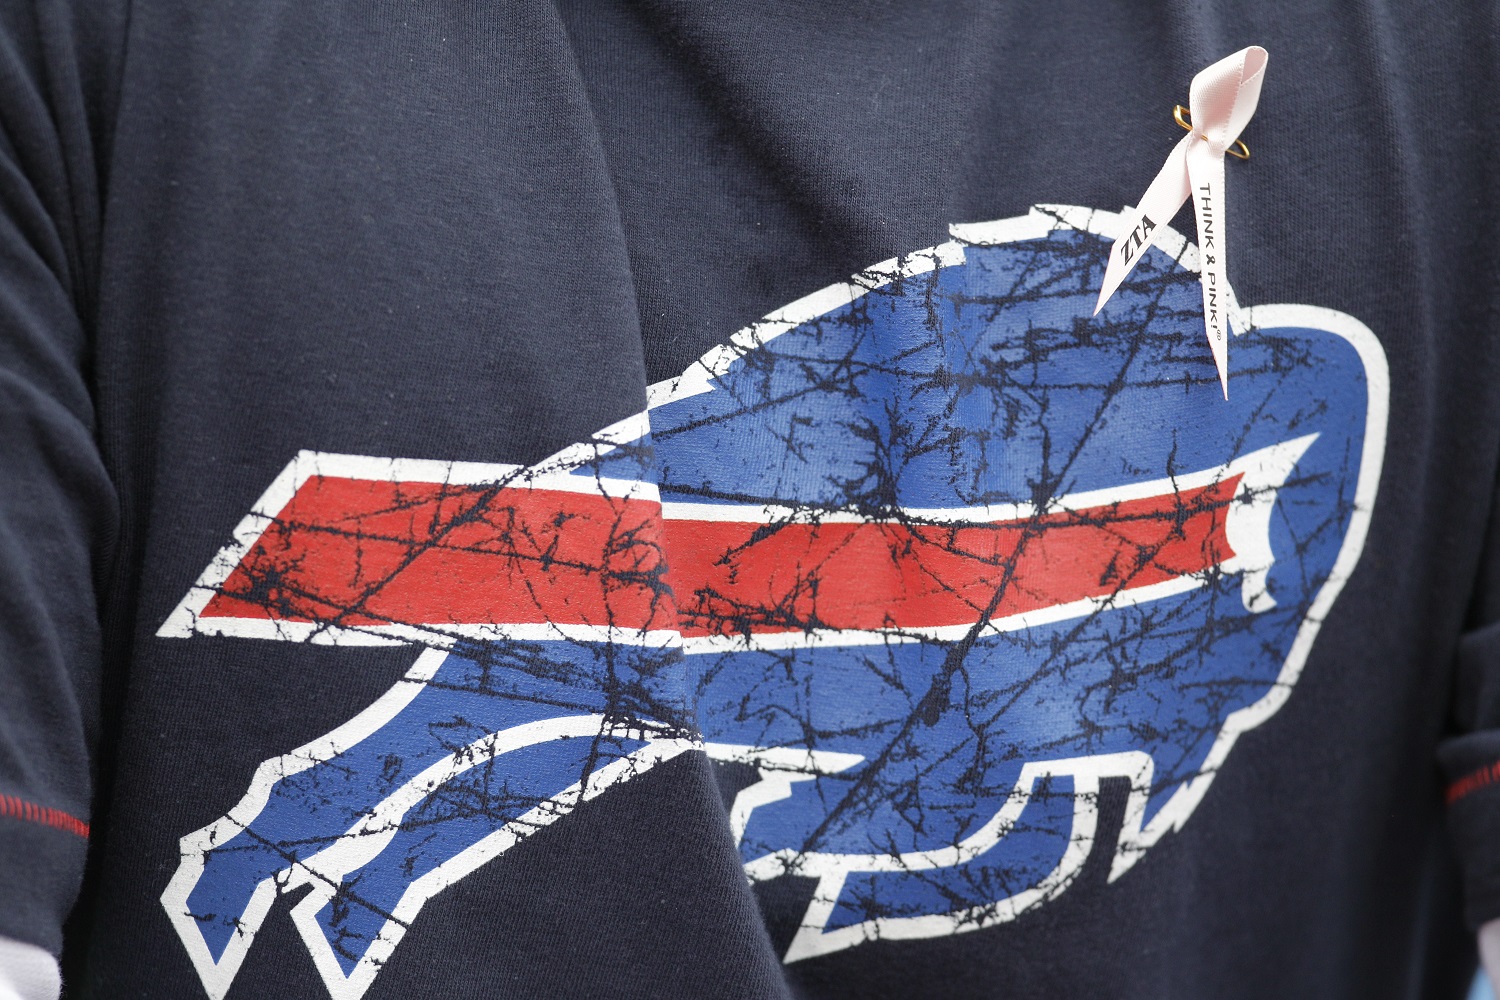 A Buffalo Bills logo is shown before the NFL football game against the New York Jets in Orchard Park, N.Y., Sunday, Oct. 3, 2010. (AP Photo/ David Duprey)